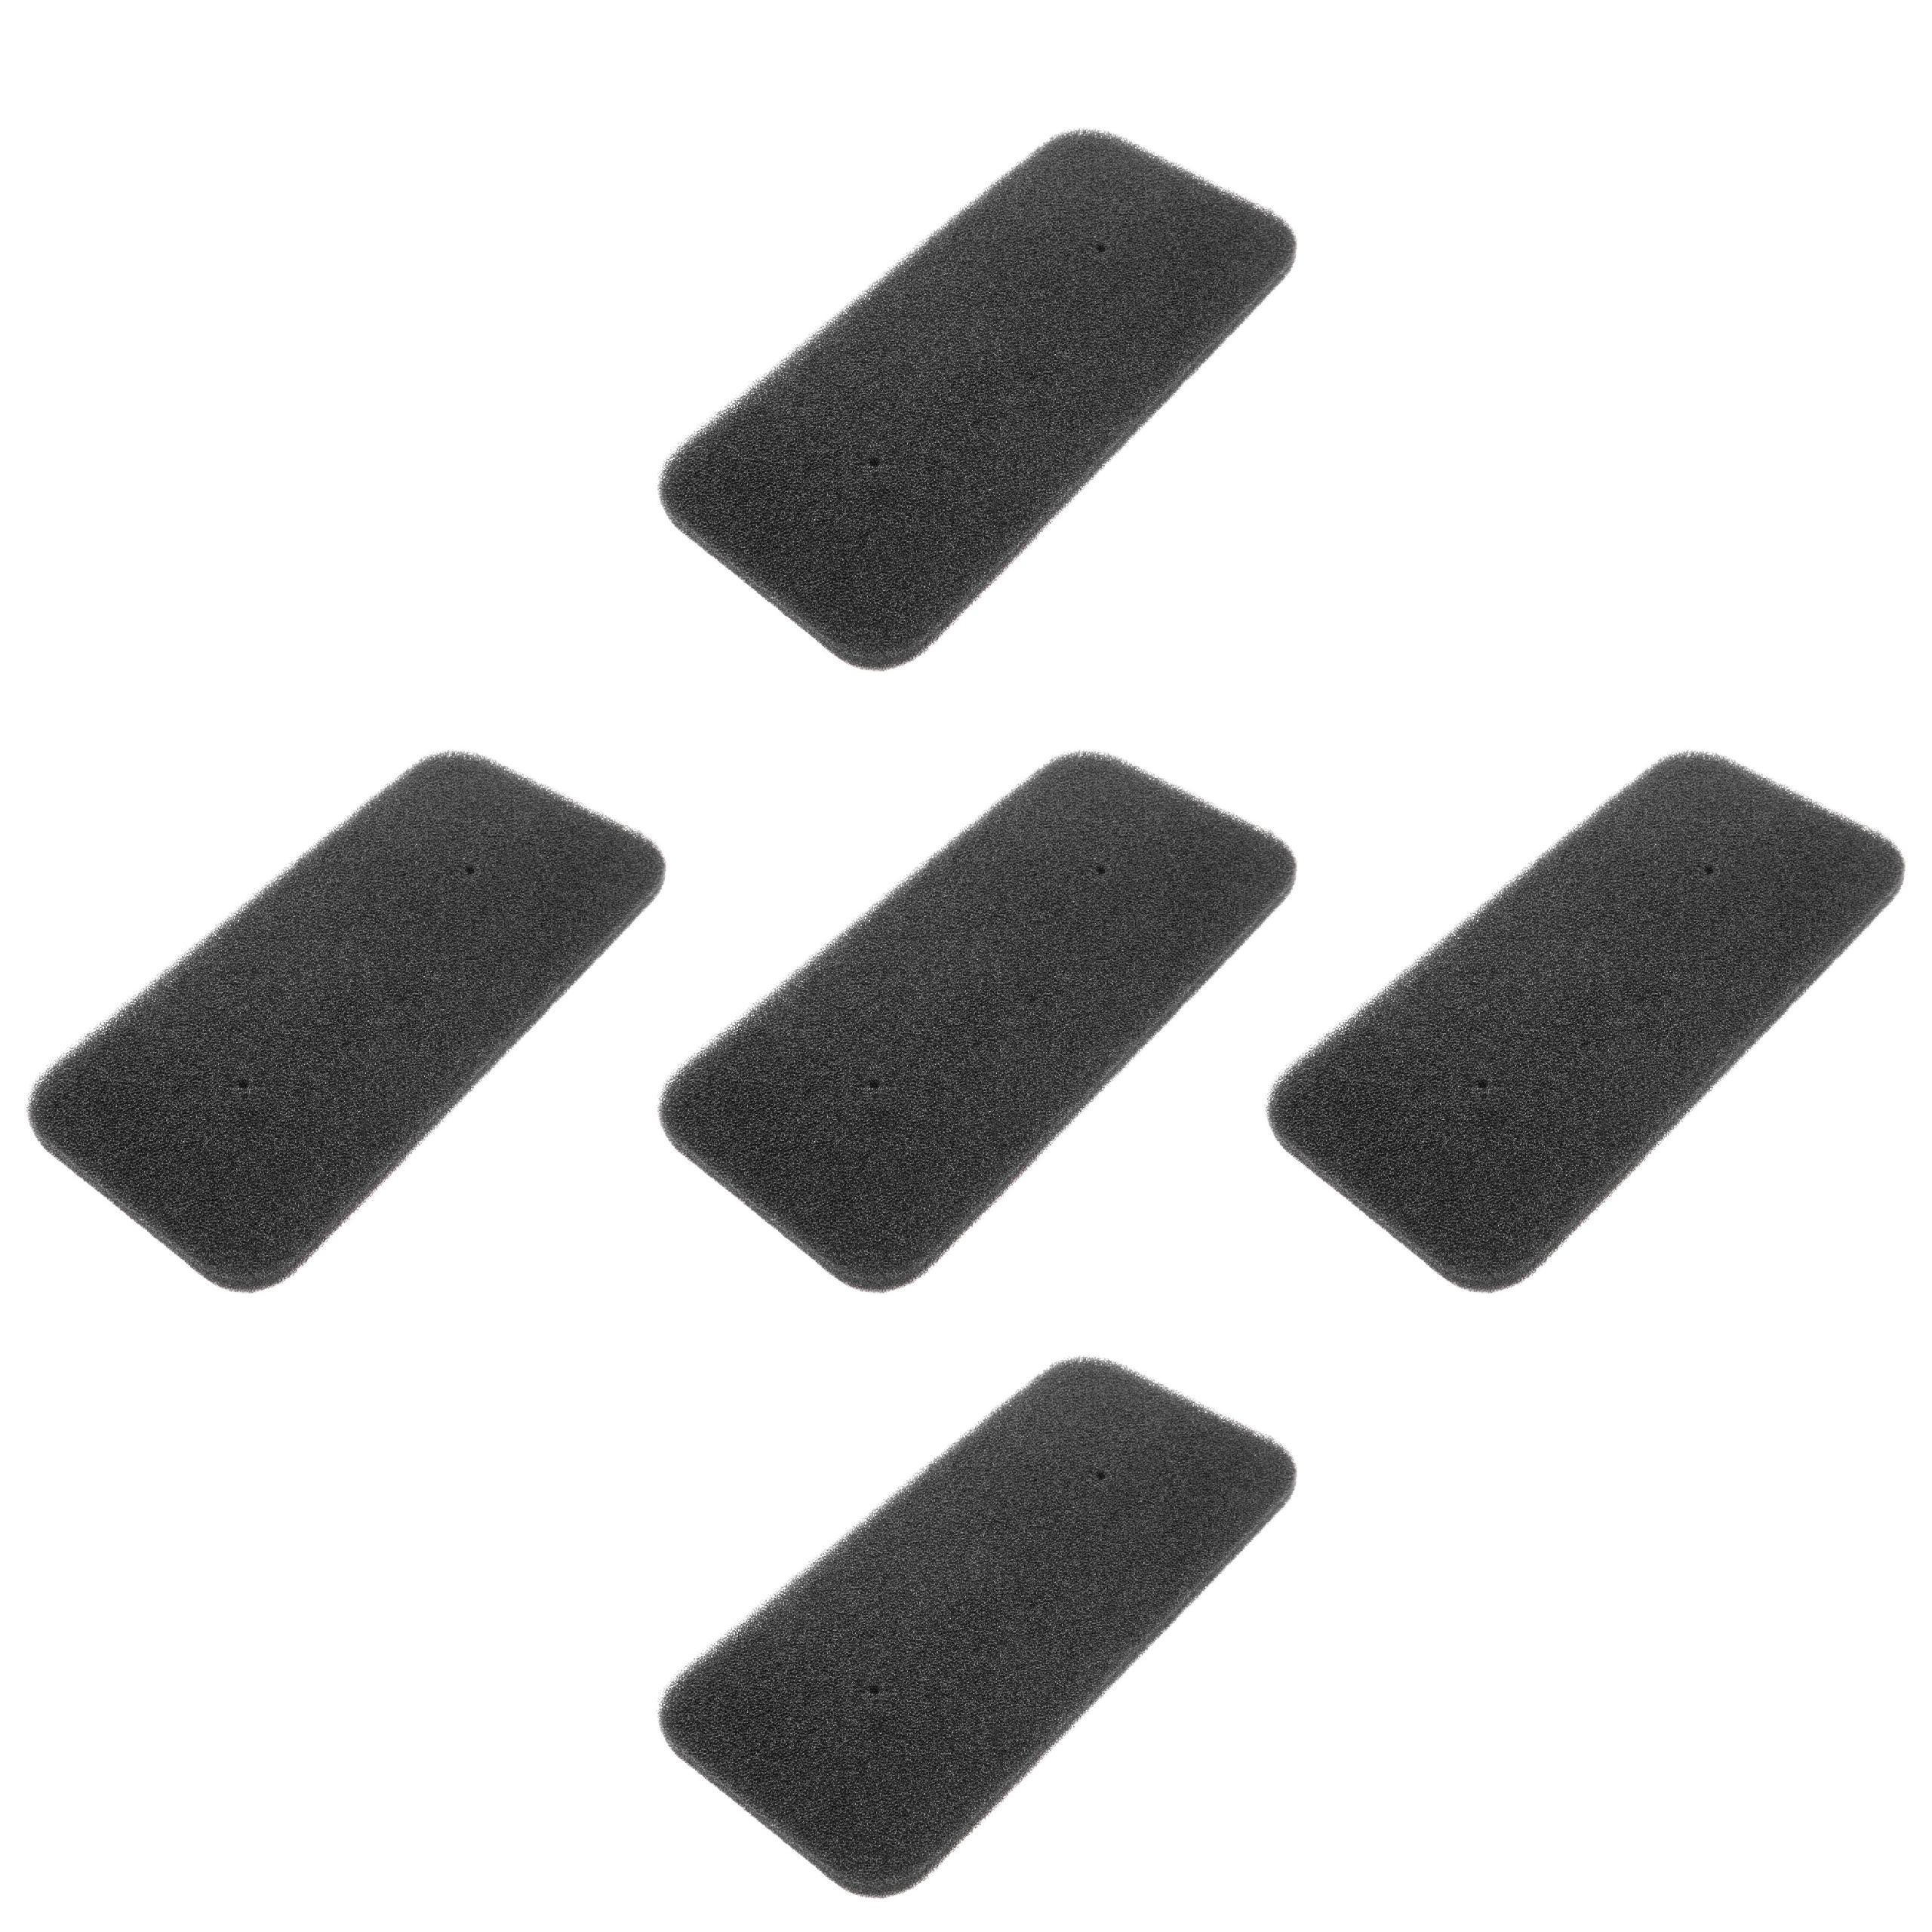 Filter Set (5x sponge filter) as Replacement for Candy 40006731 Tumble Dryer etc.